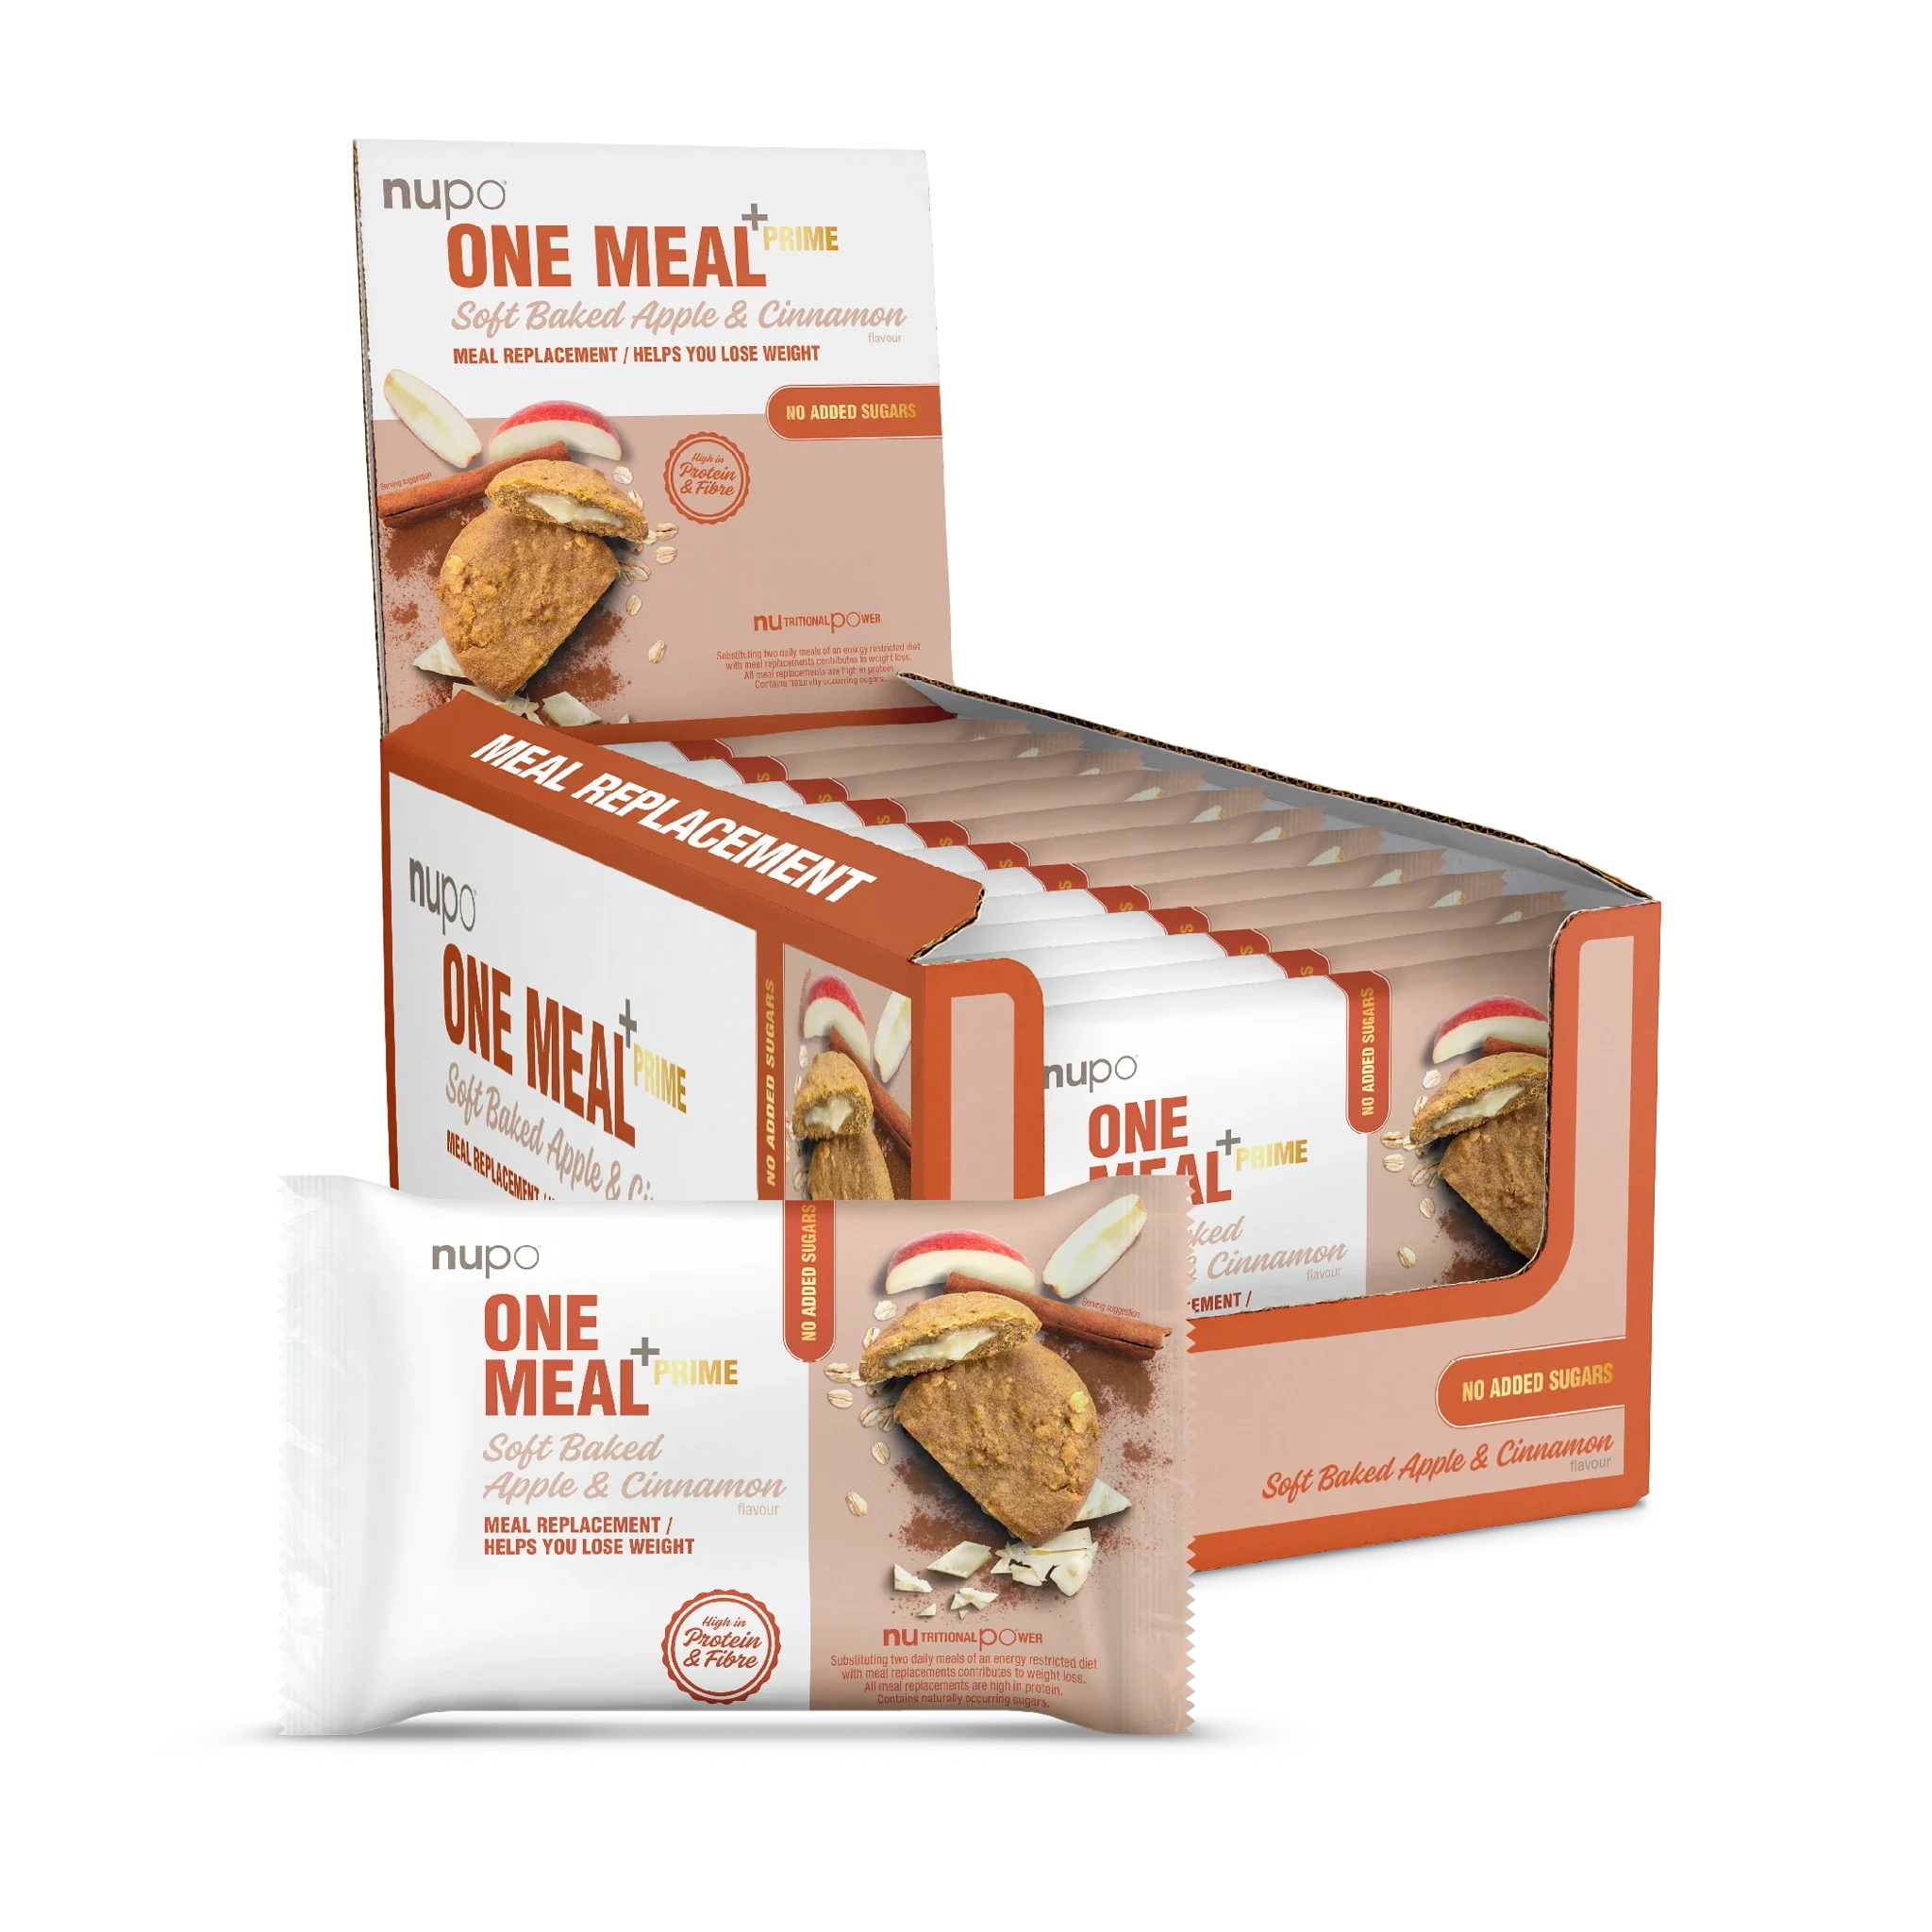 One Meal +Prime Soft Baked, Apple & Cinnamon